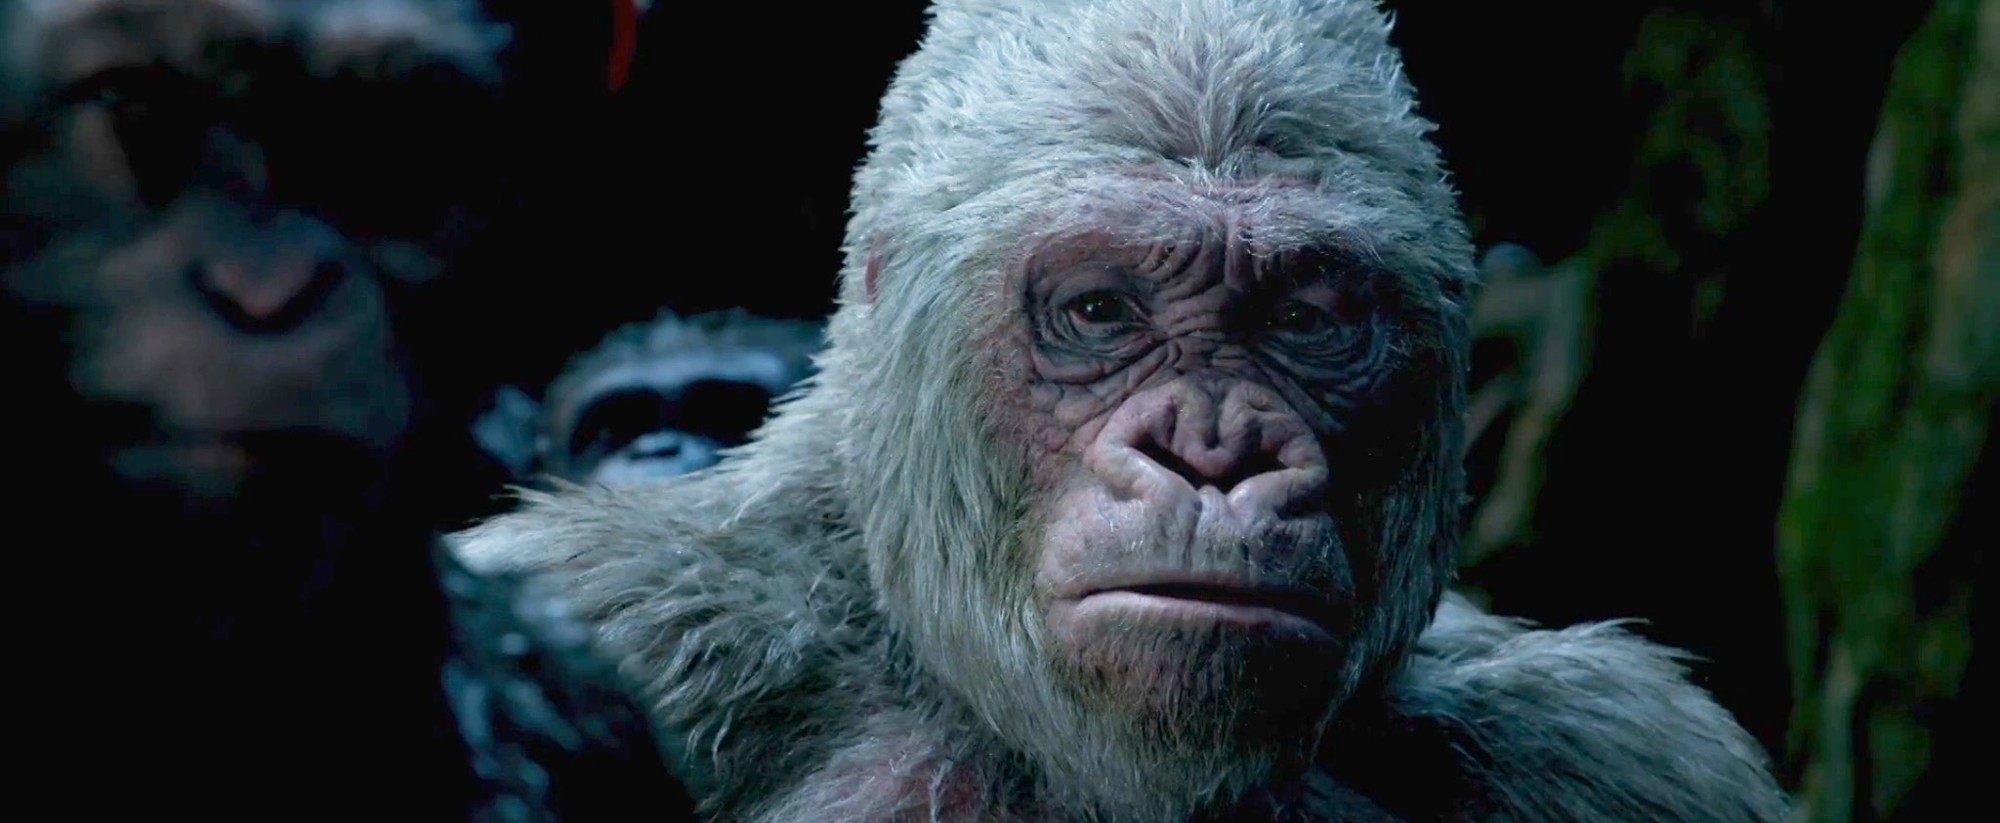 Winter from 20th Century Fox's War for the Planet of the Apes (2017)